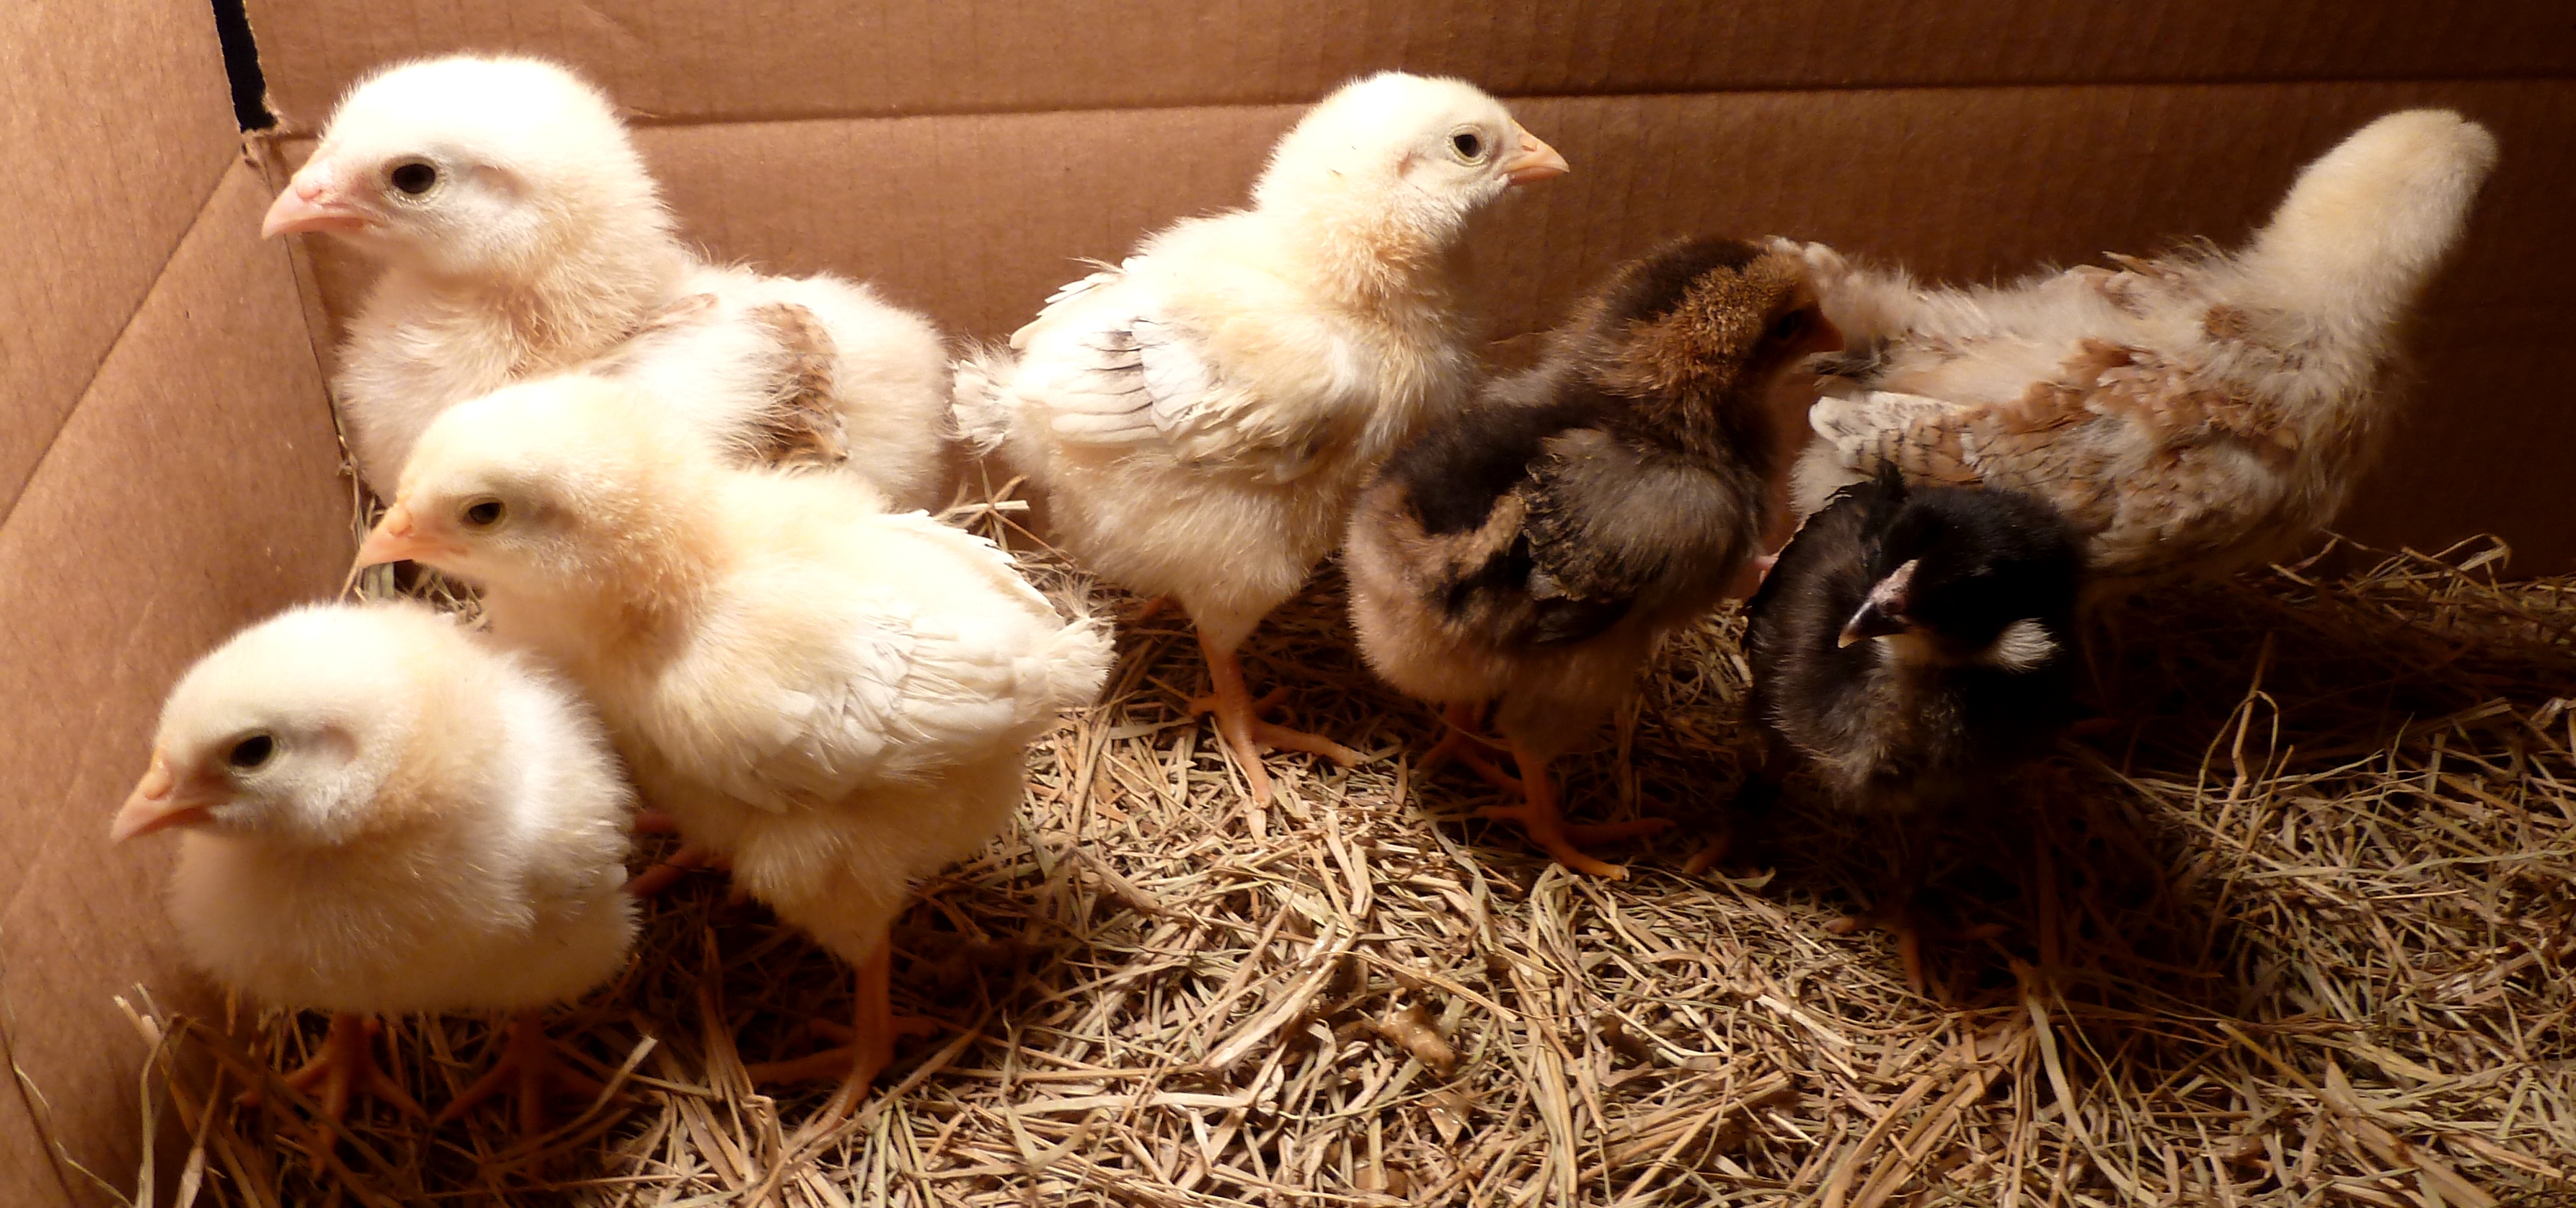 Feather Sexing Chicks | Peregrin Farms3573 x 1676